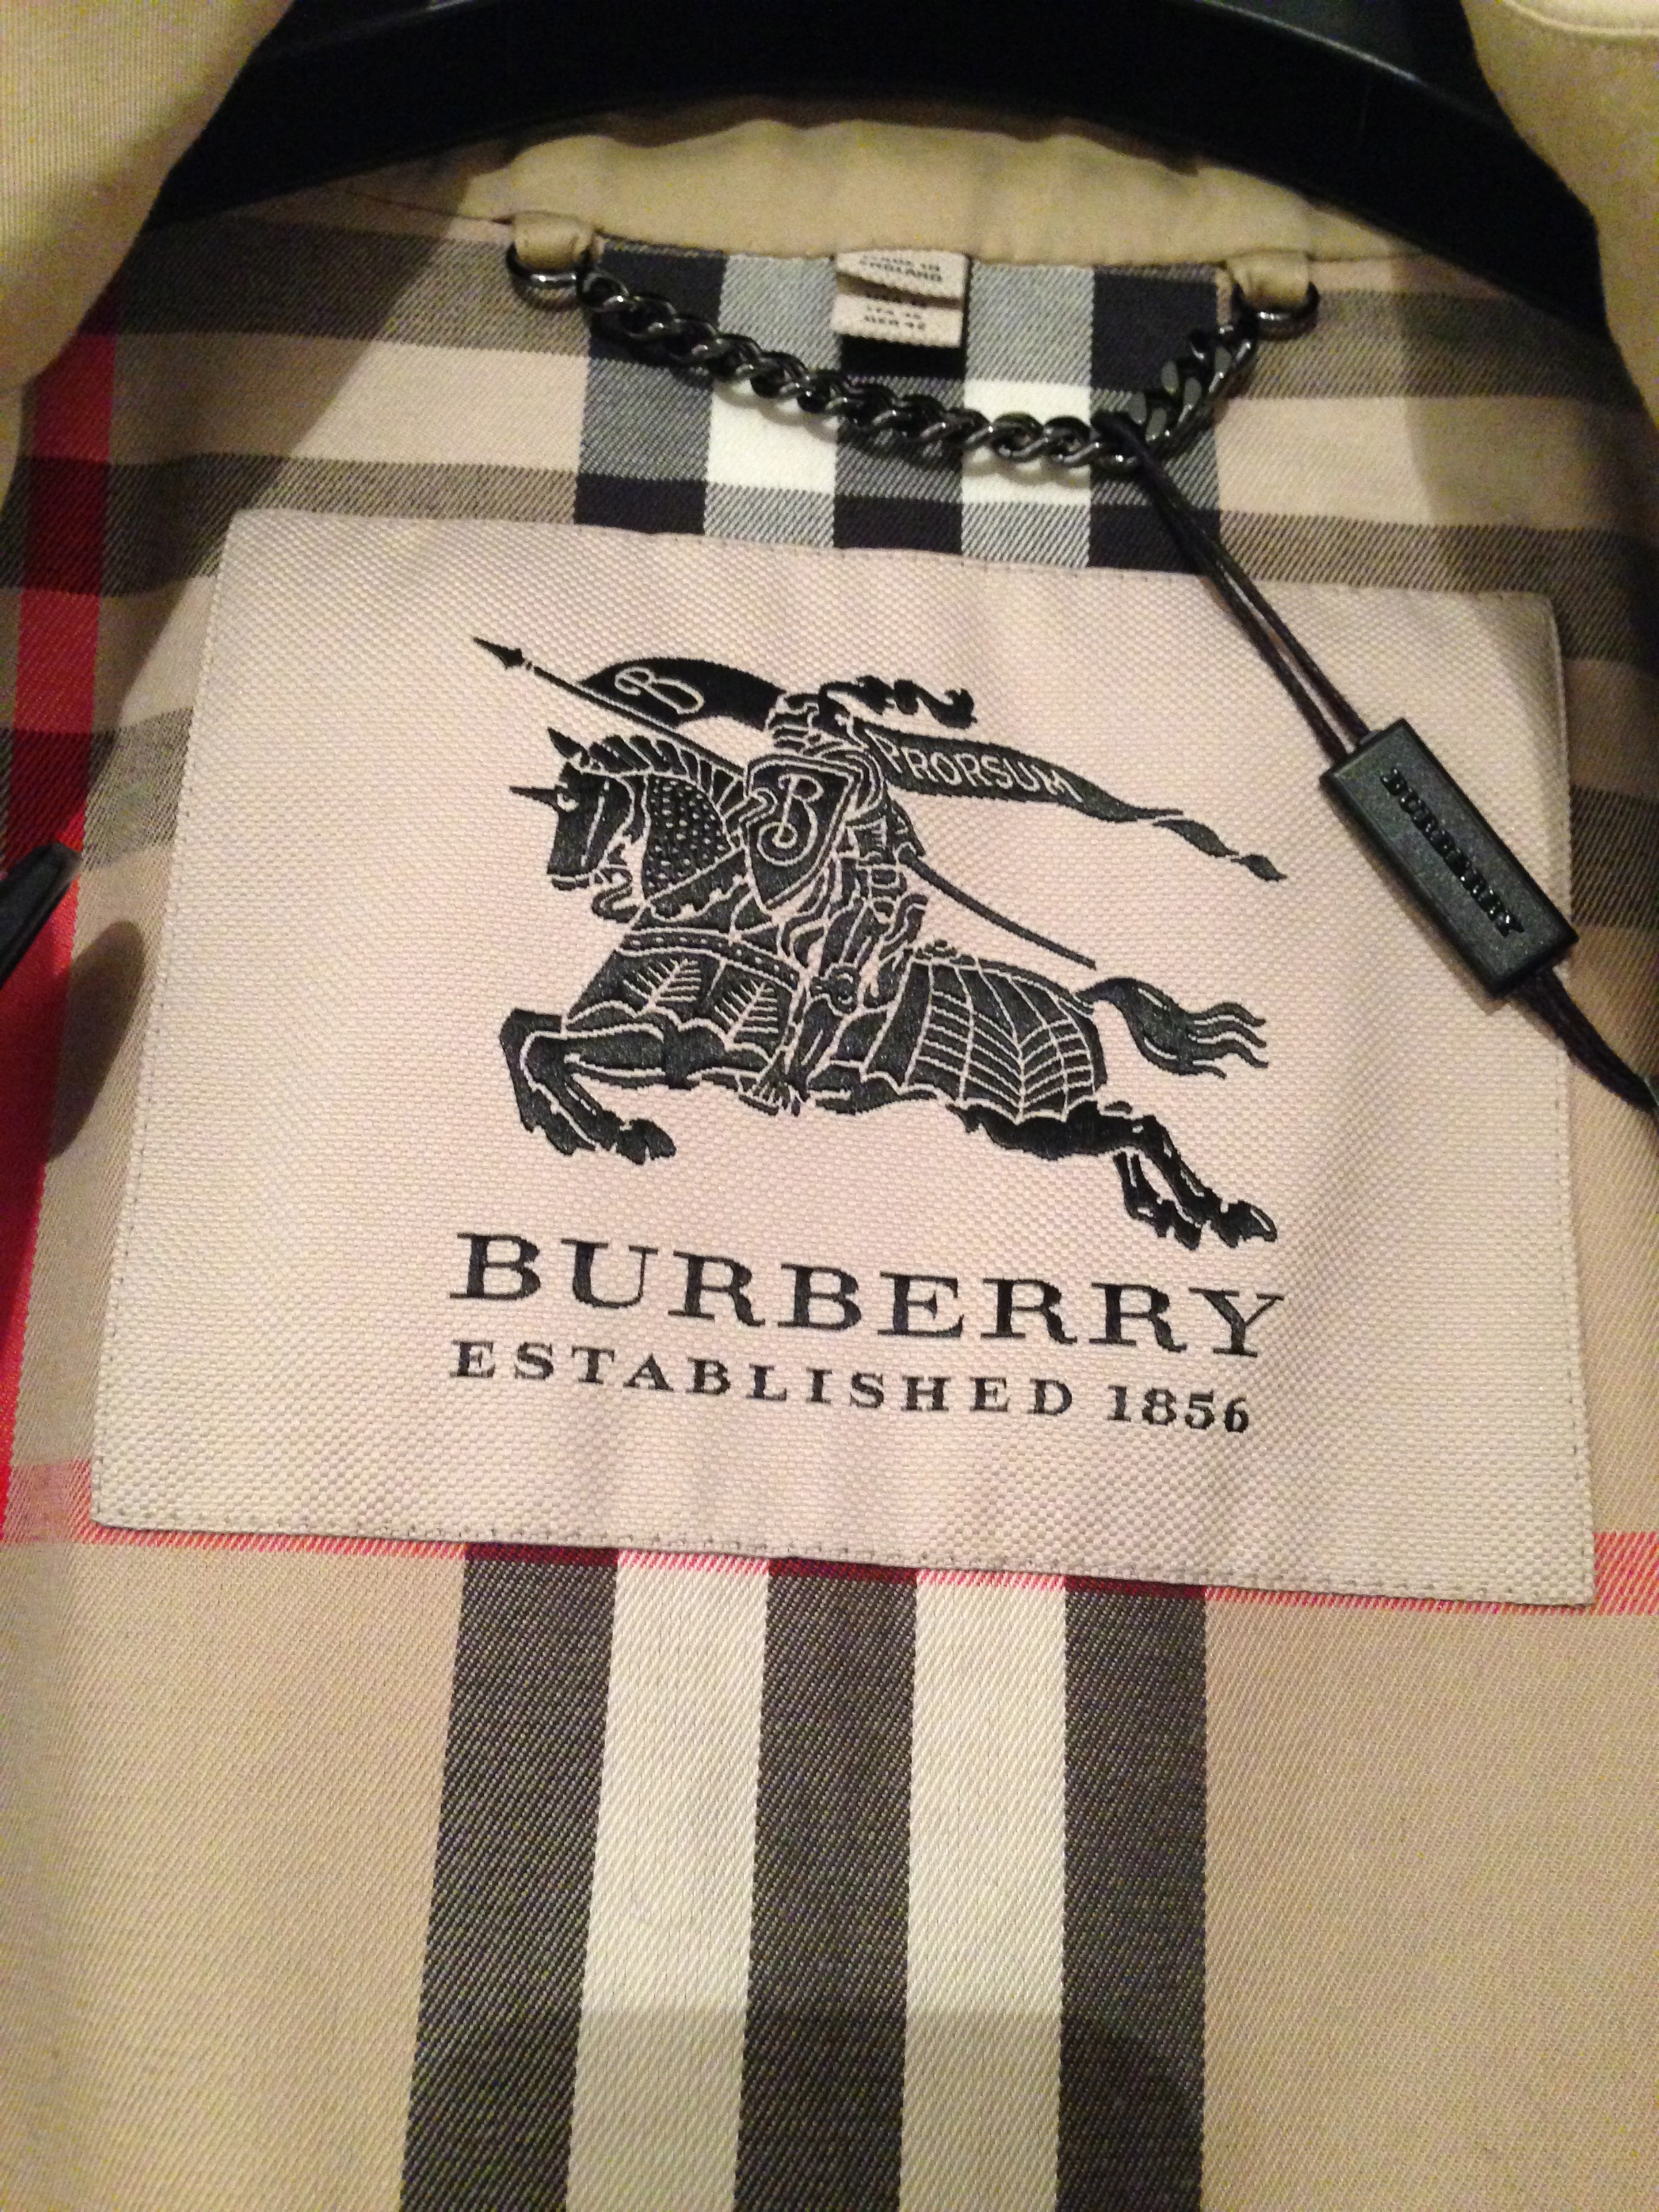 burberry made in china tag